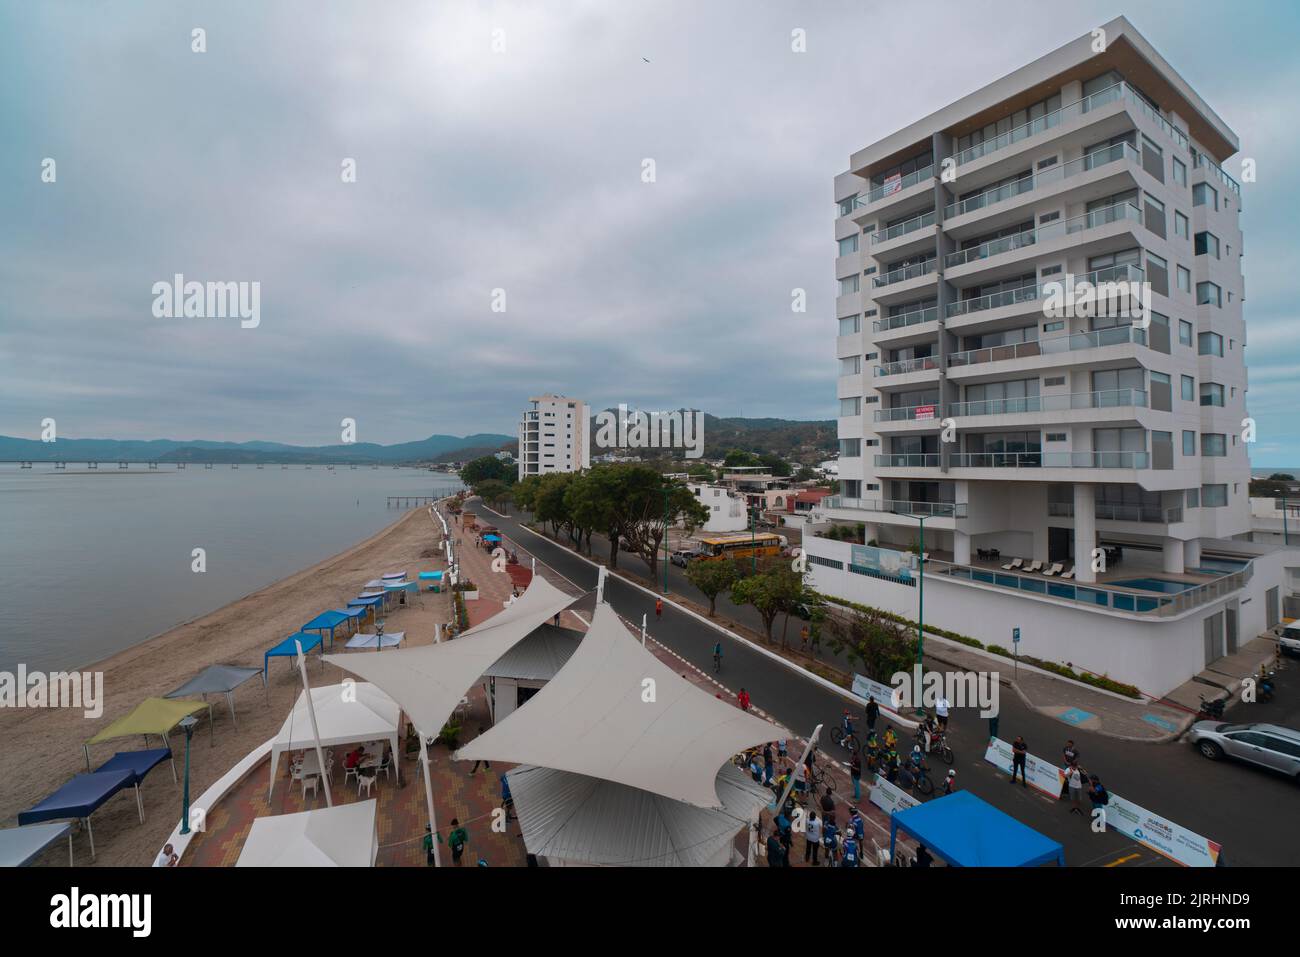 Bahia de Caraquez, Manabi / Ecuador - August 21 2022: People walking on the boardwalk of the city next to the beach on a cloudy day Stock Photo